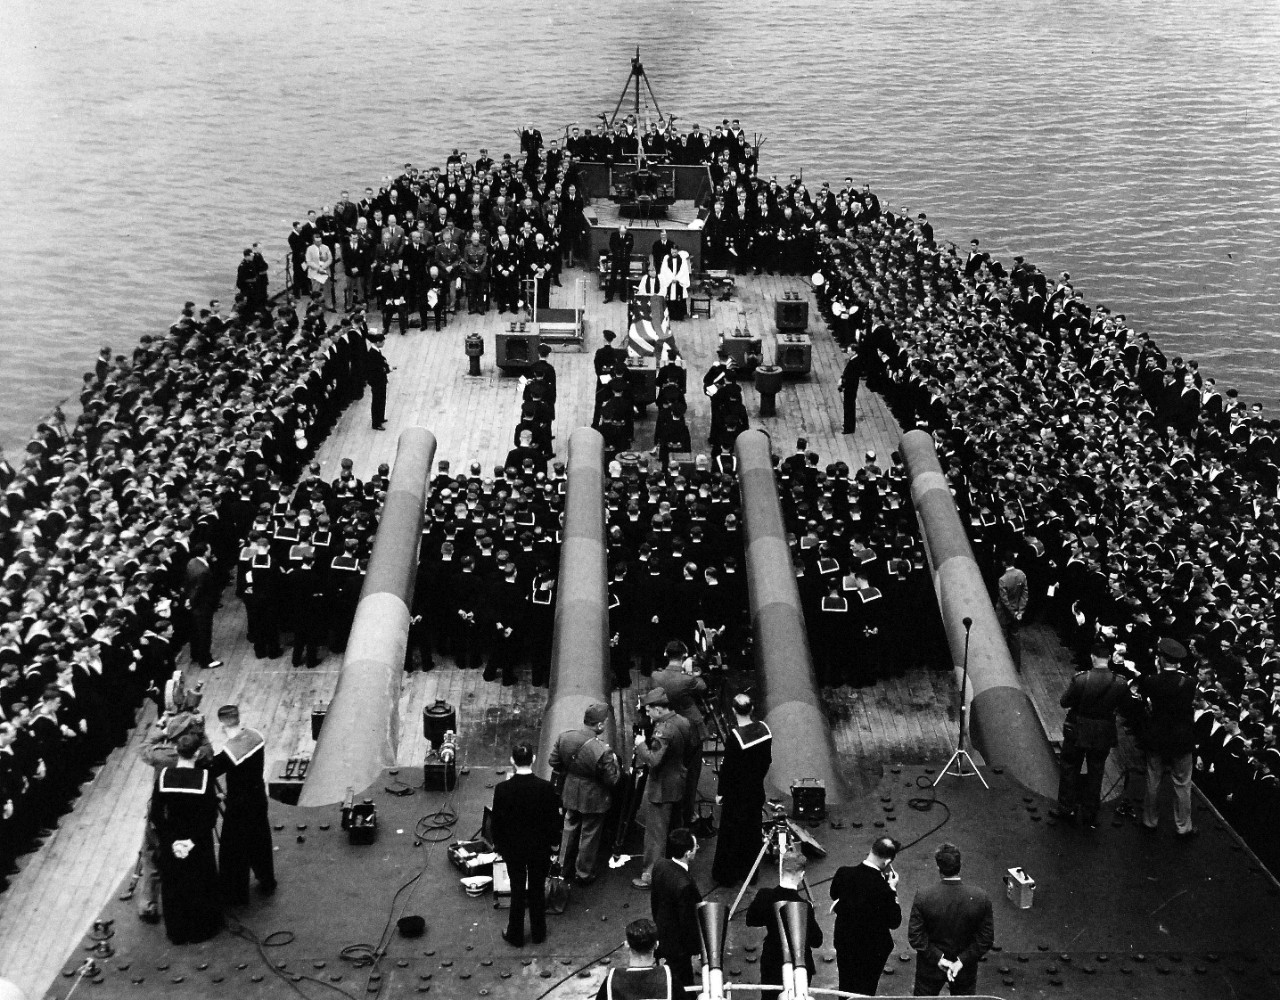 80-G-26878: Atlantic Charter, August 1941.  Informal group photograph including President Franklin D. Roosevelt and Prime Minister Winston S. Churchill on deck of HMS Prince of Wales during church services during the Atlantic Charter.  Upper left, President Roosevelt and Prime Minister Churchill are seated in front of their respective standing staff members.  Big guns of the British battleship range over the gathering.  Photograph released August 1941.   Official U.S. Navy Photograph, now in the collections of the National Archives.  (2016/03/22).